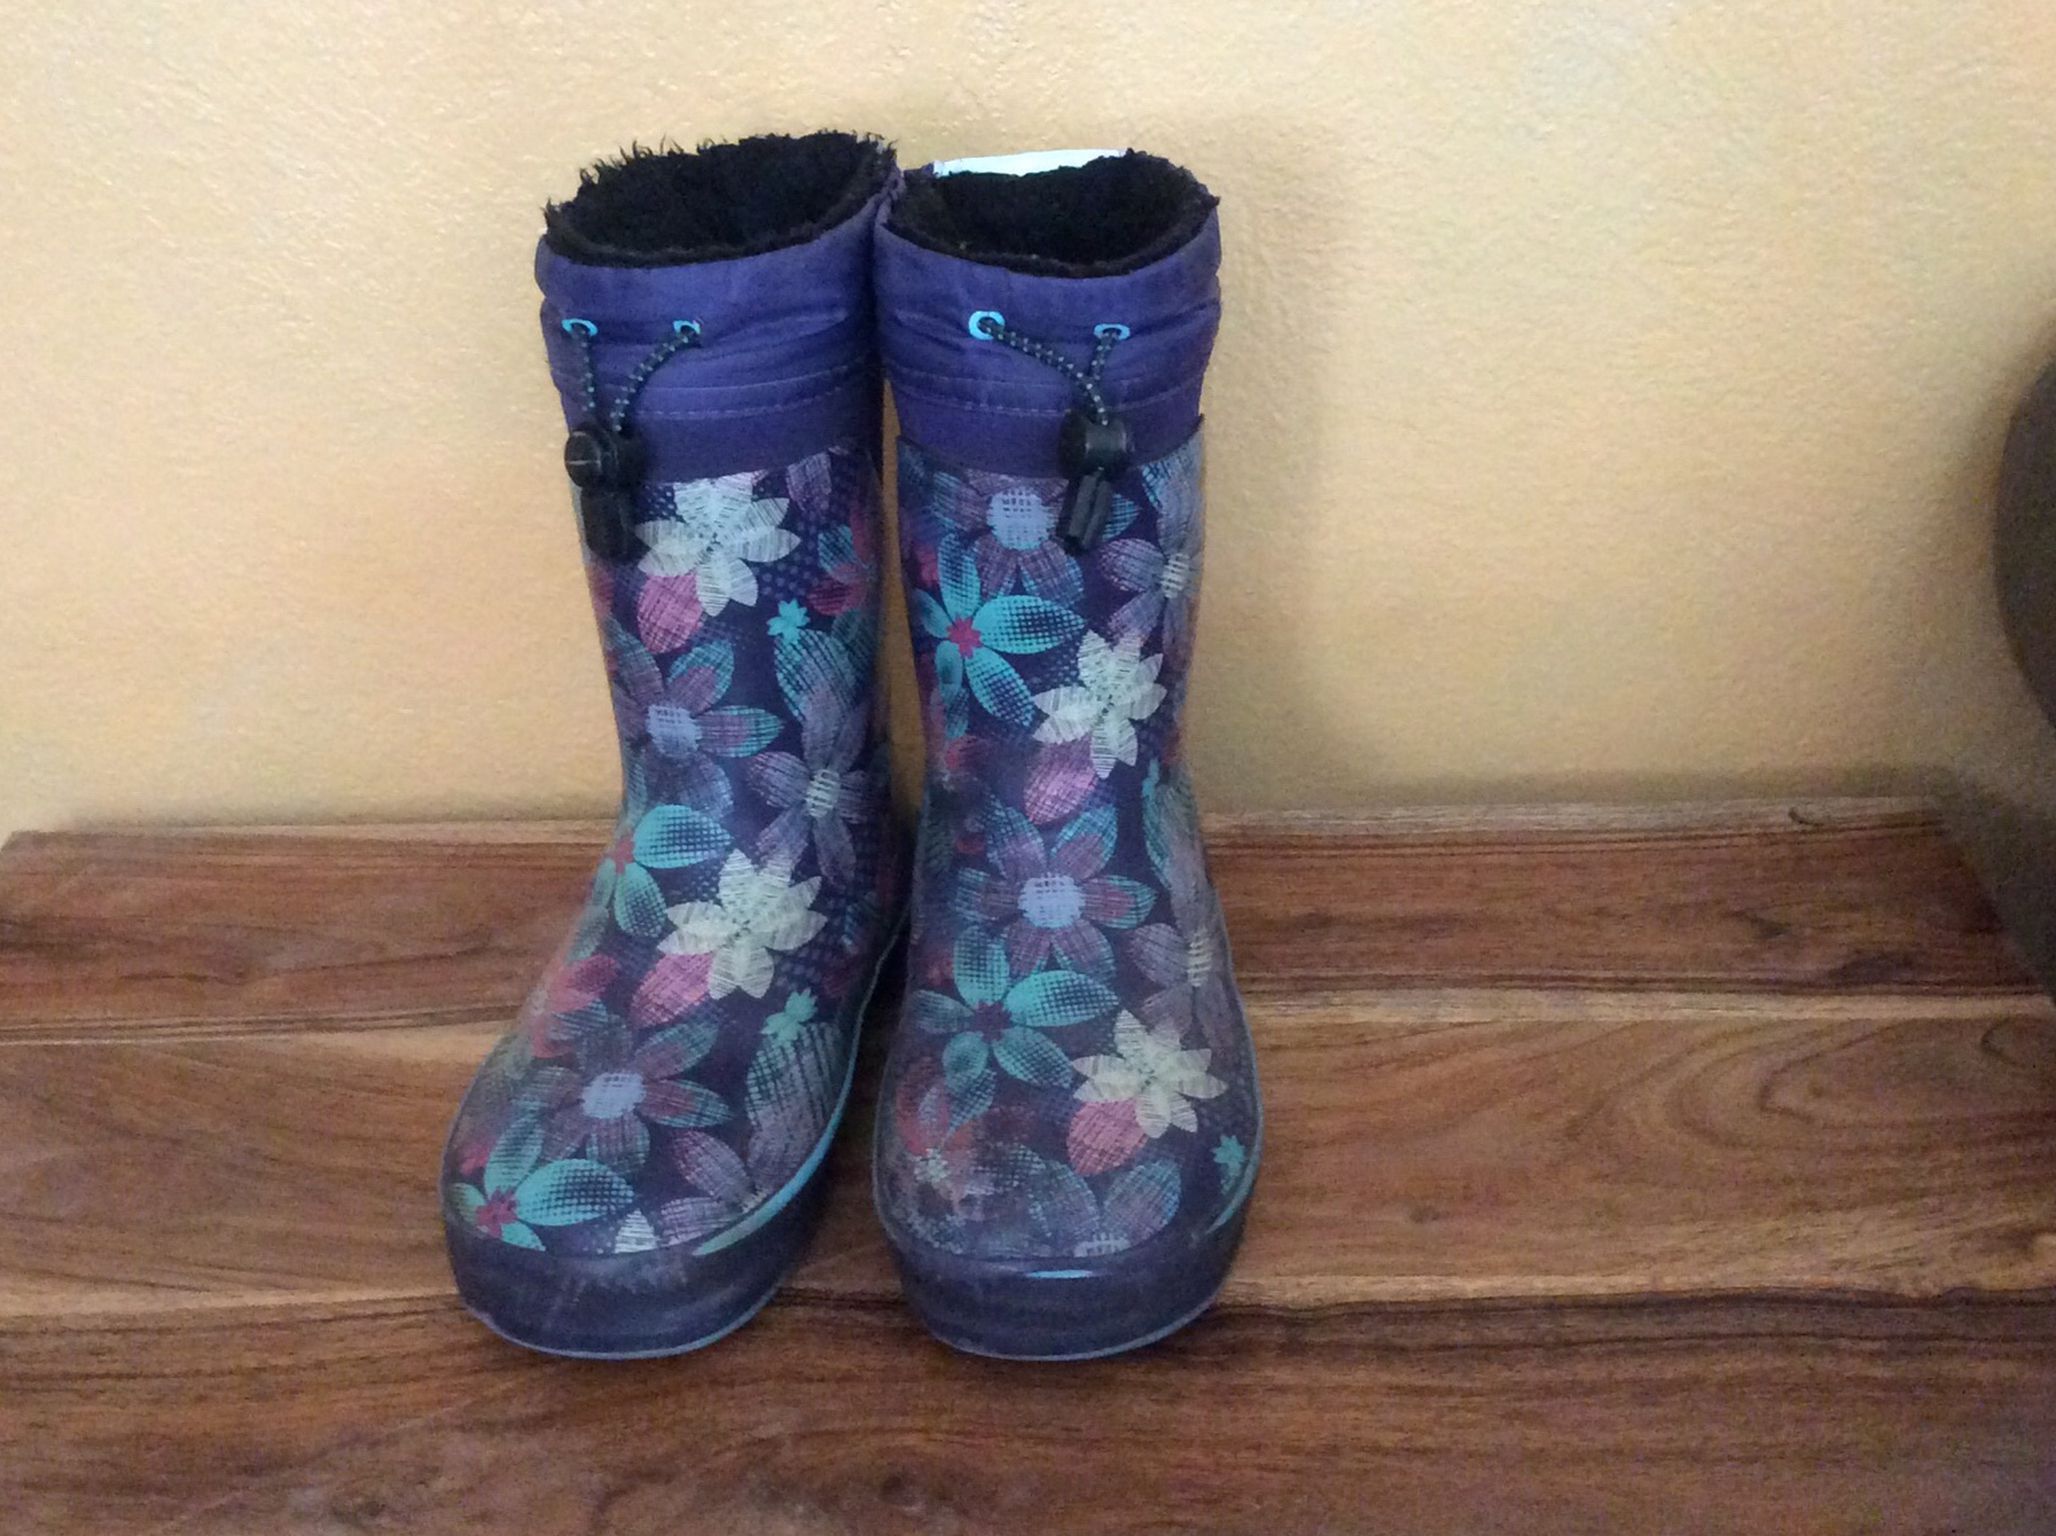 Free Rain Boots / Snow Boots Size 13/1